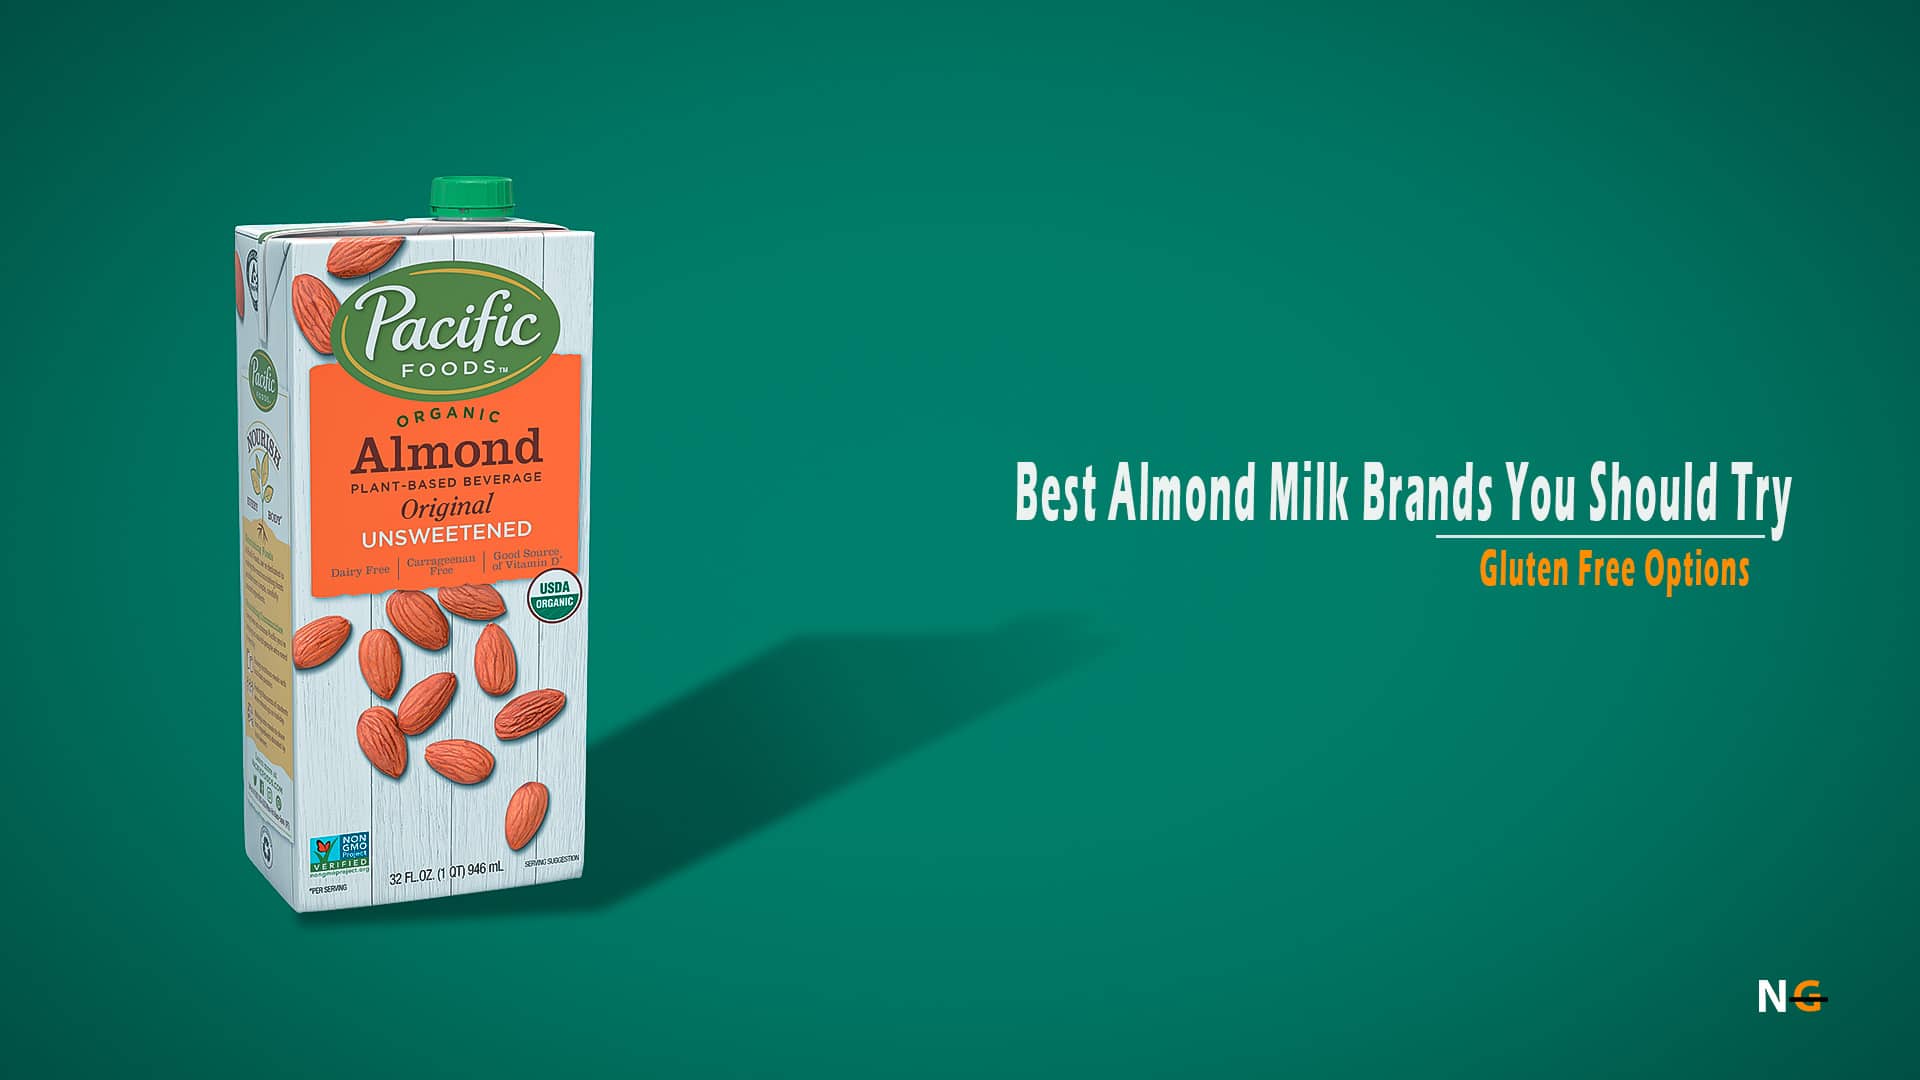 Best Almond Milk Brands You Should Try